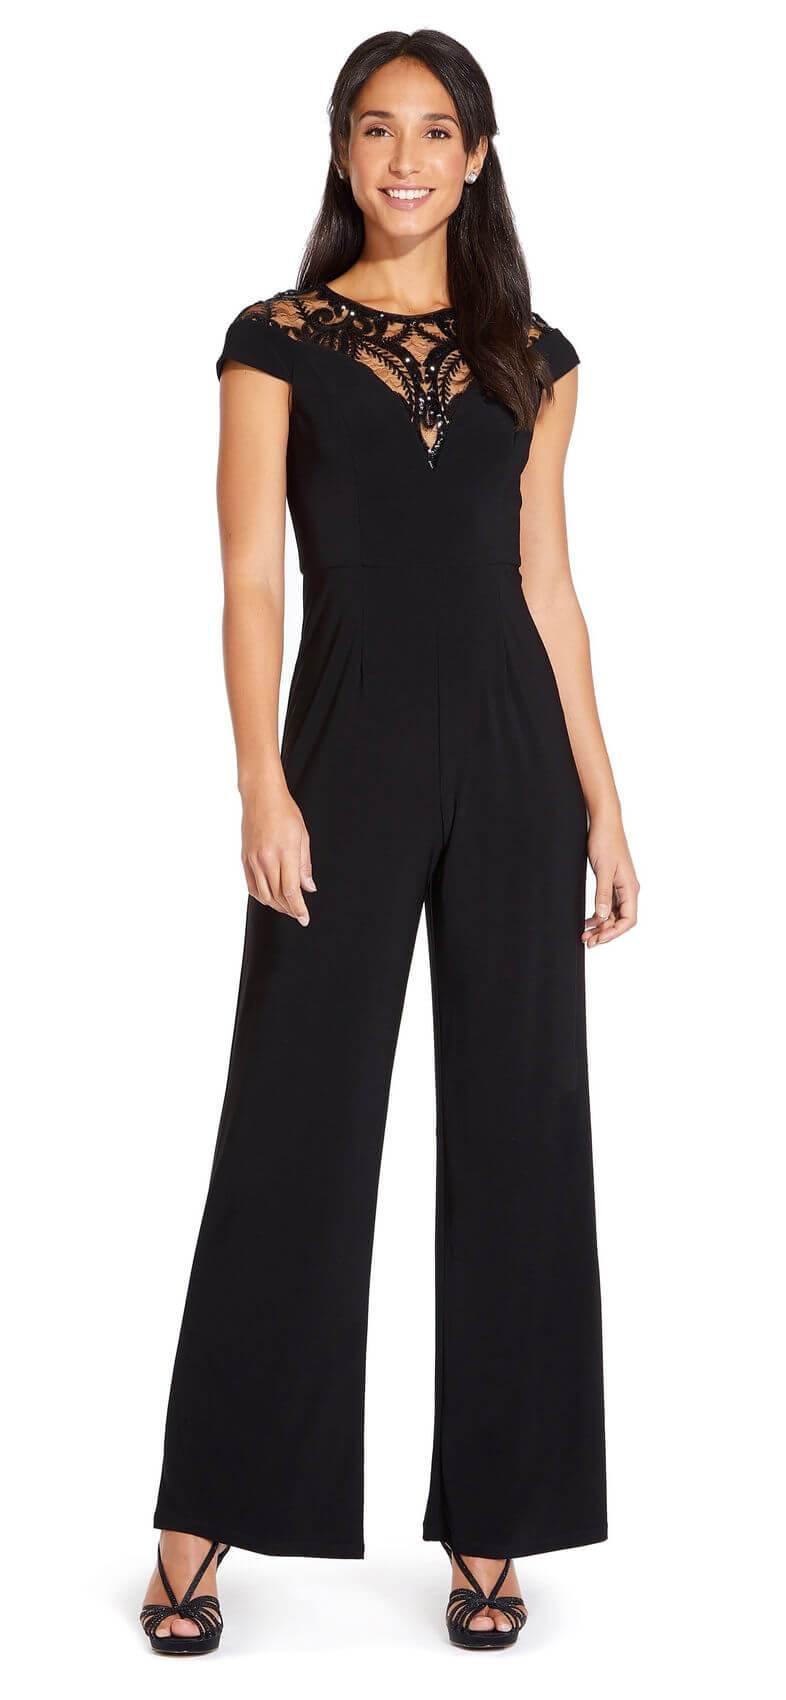 Adrianna Papell AP1E206569 Short Sleeve Formal Beaded Pant Suit | The ...